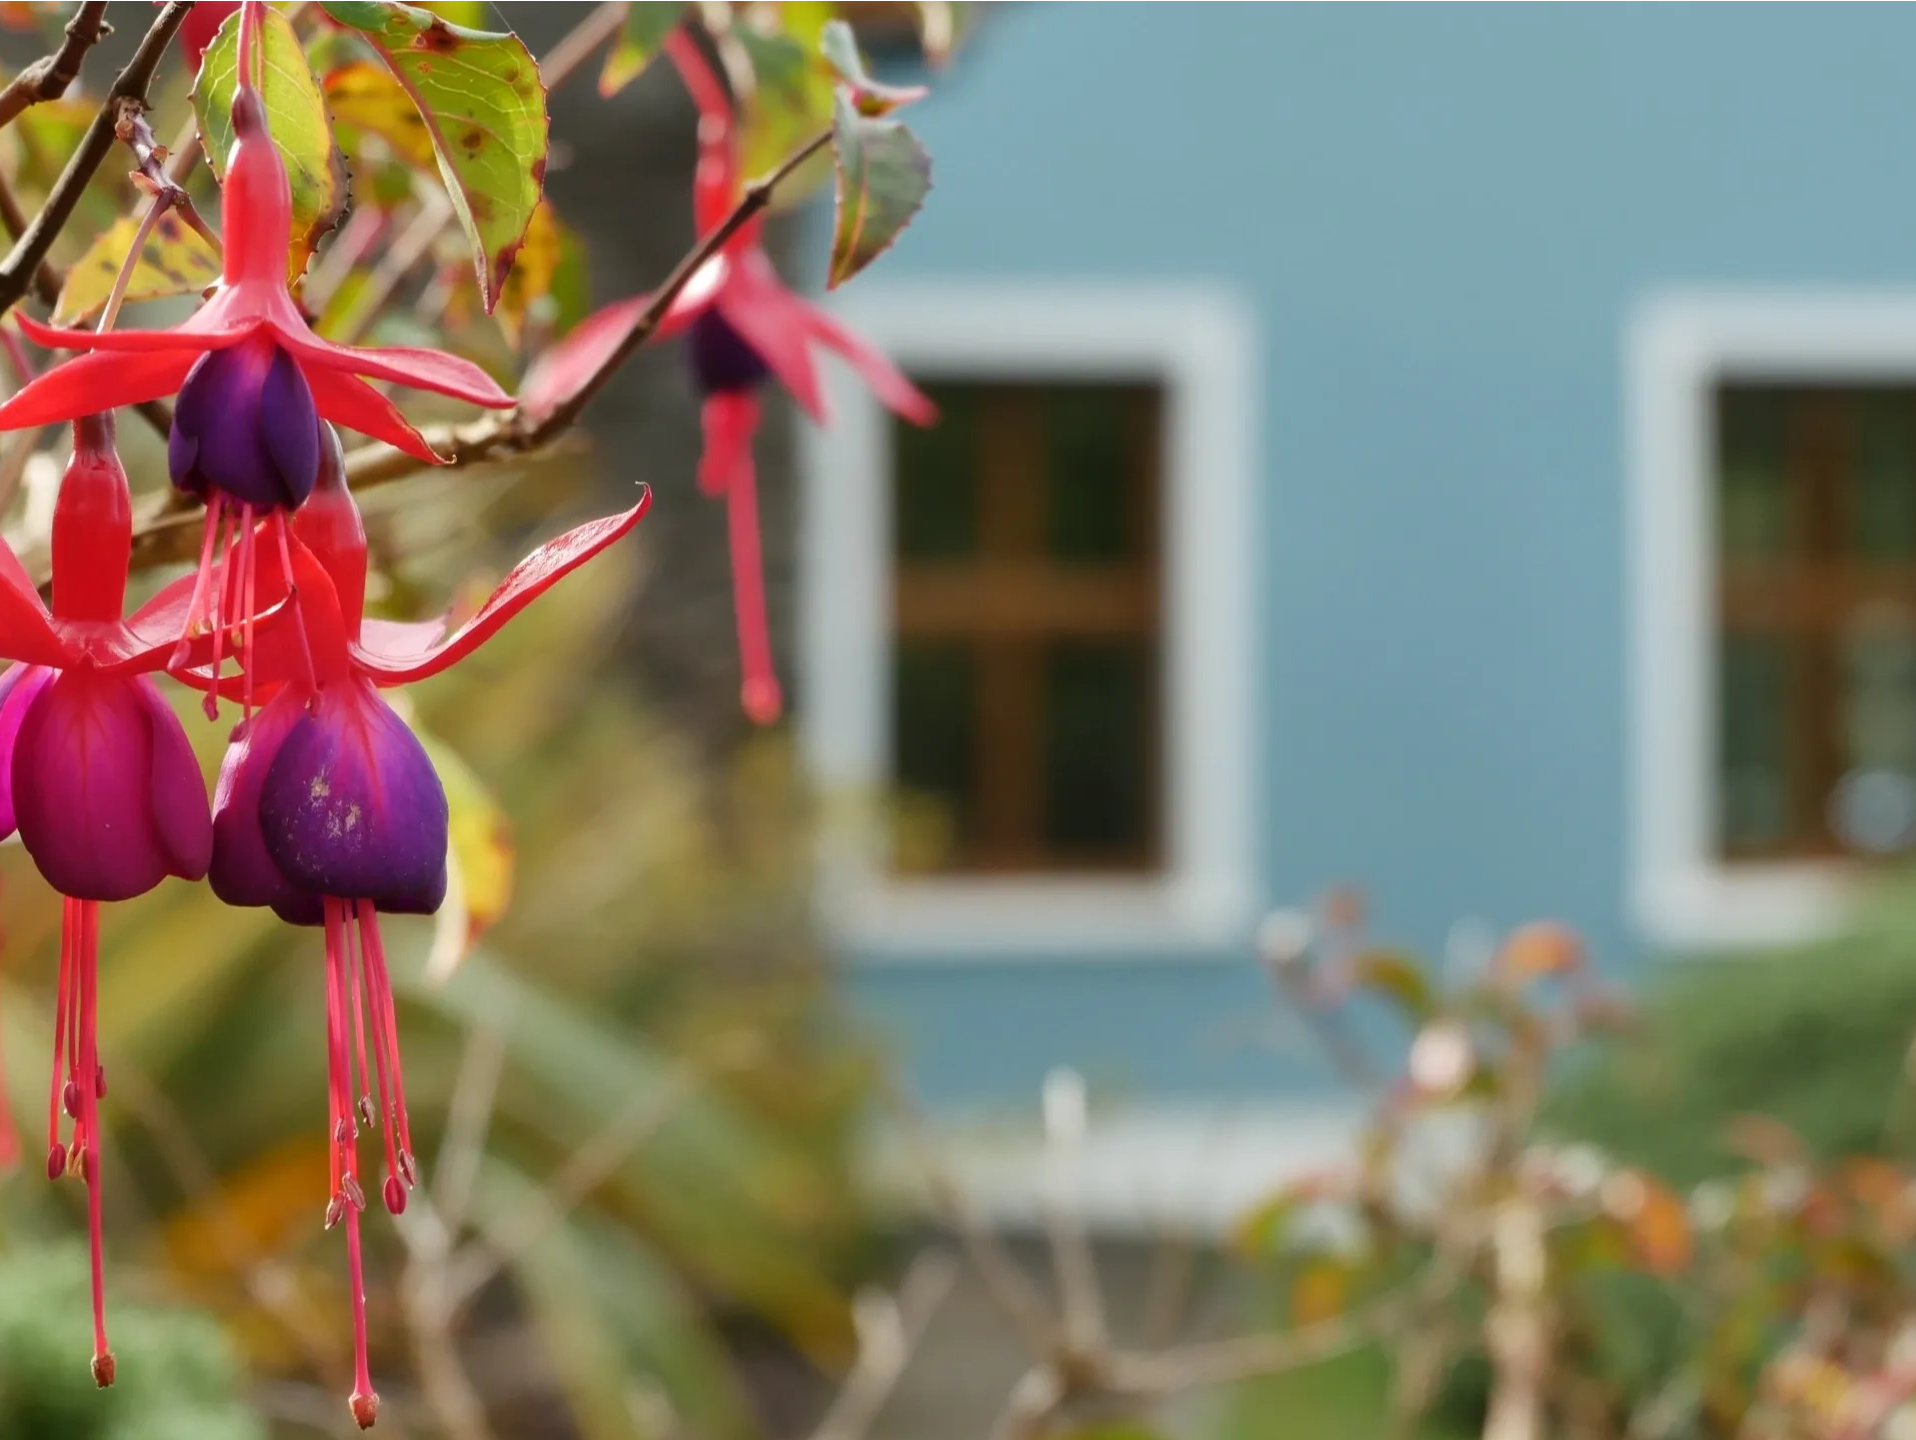 Fuchsia flowers with house in background